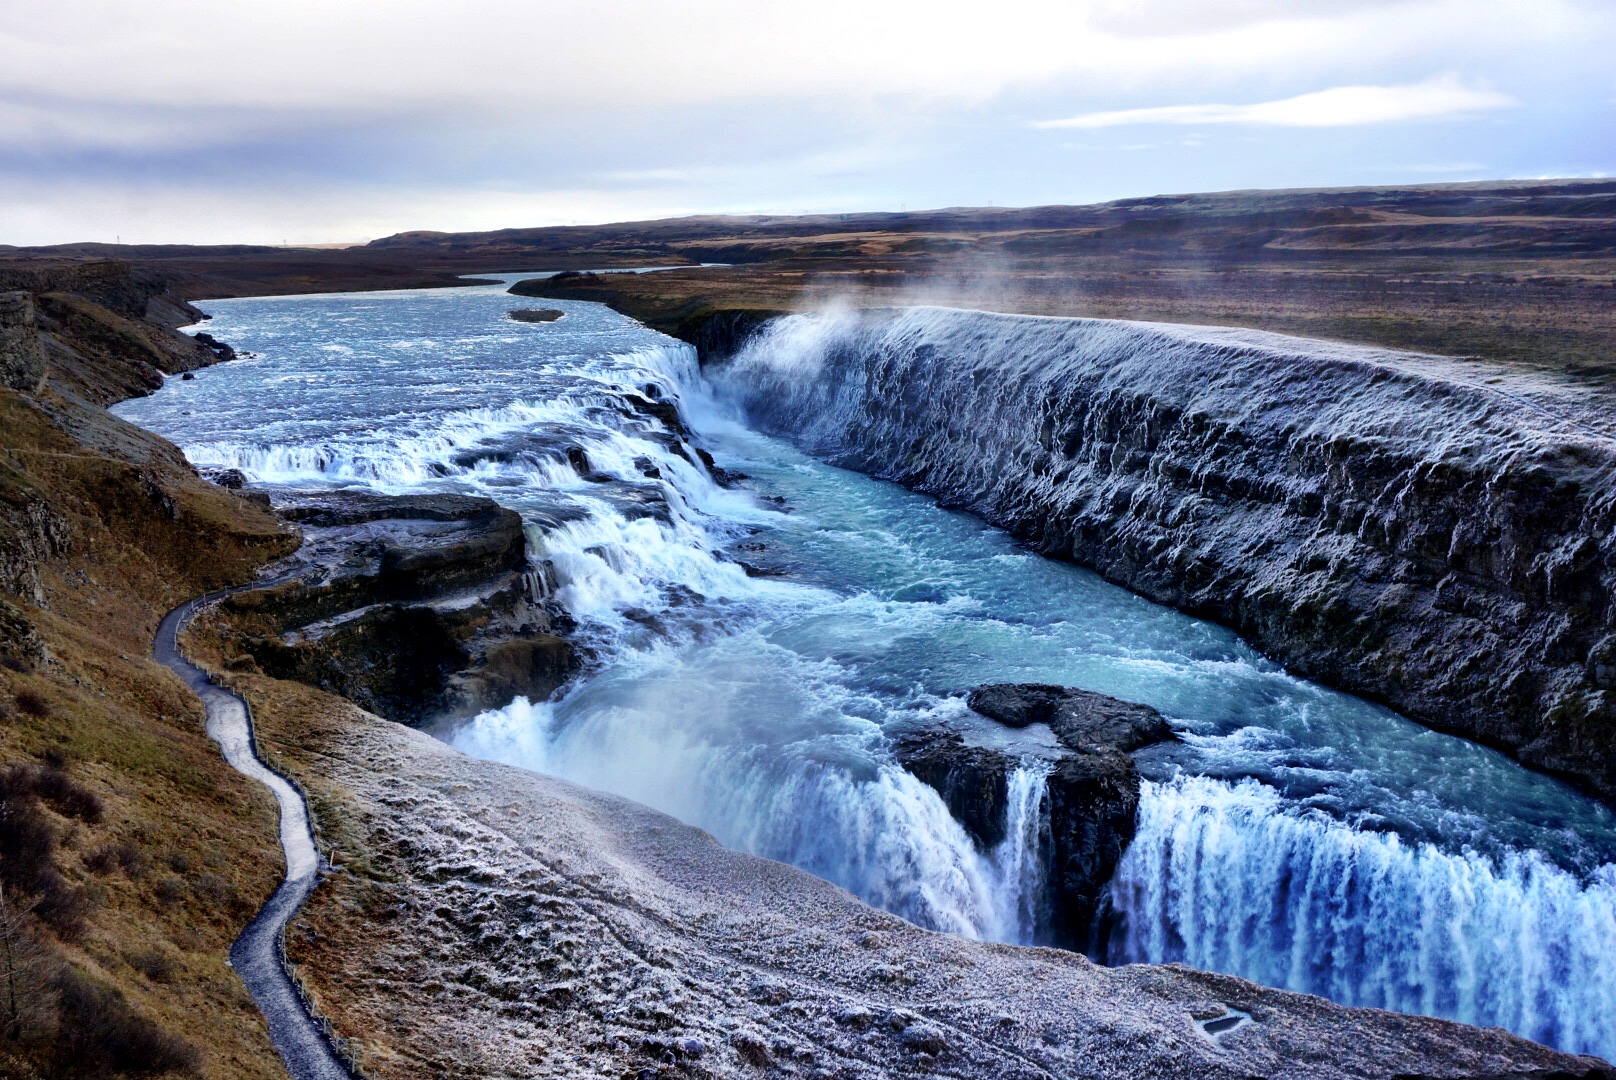 If you only have 4 days to explore Reykjavik, it can be done!